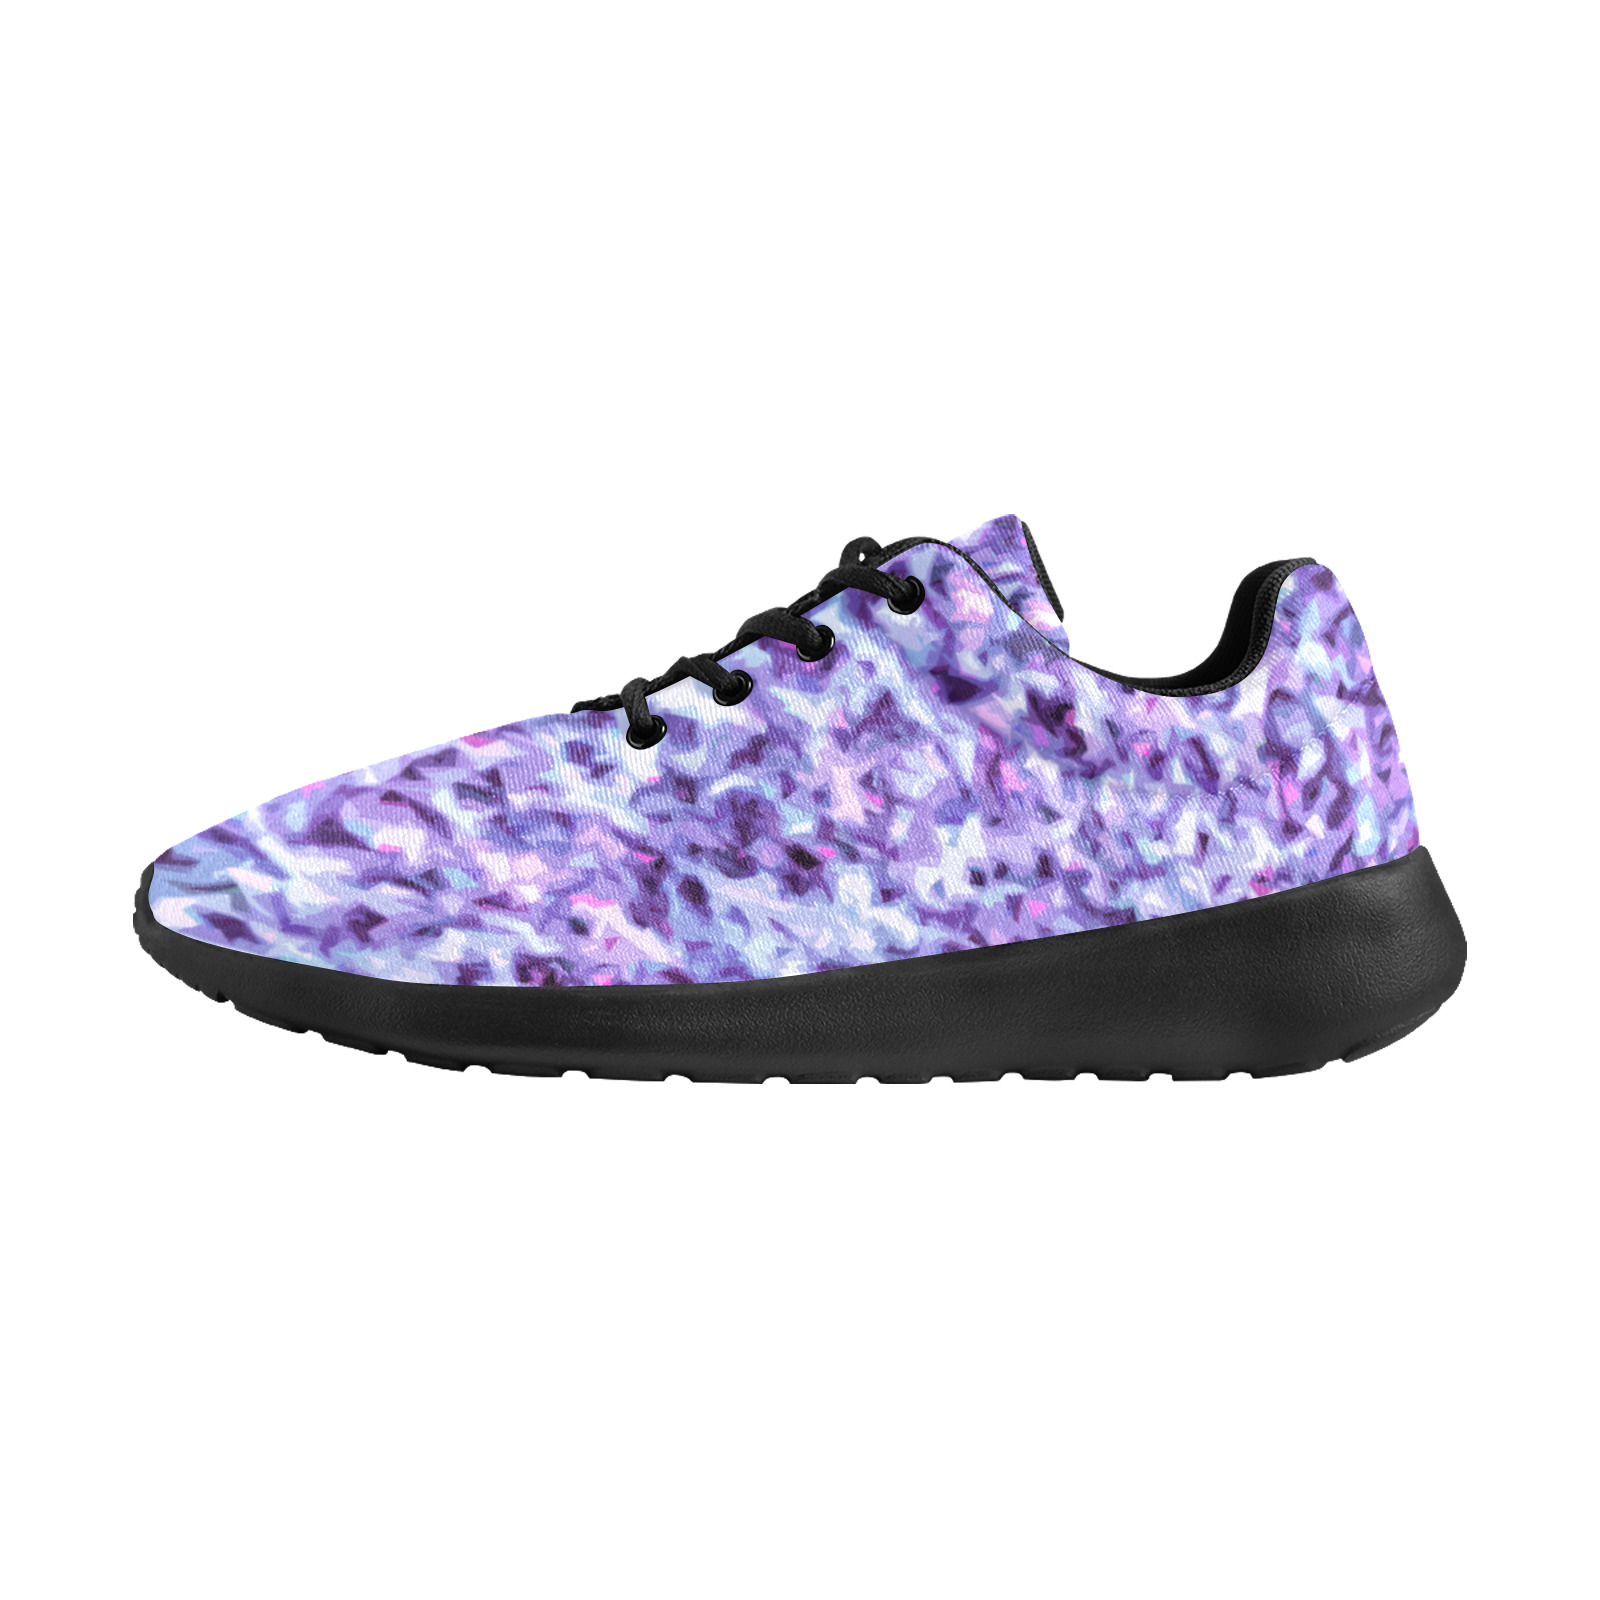 Fashion Abstract Pattern Design Women's Athletic Shoes (Model 0200)